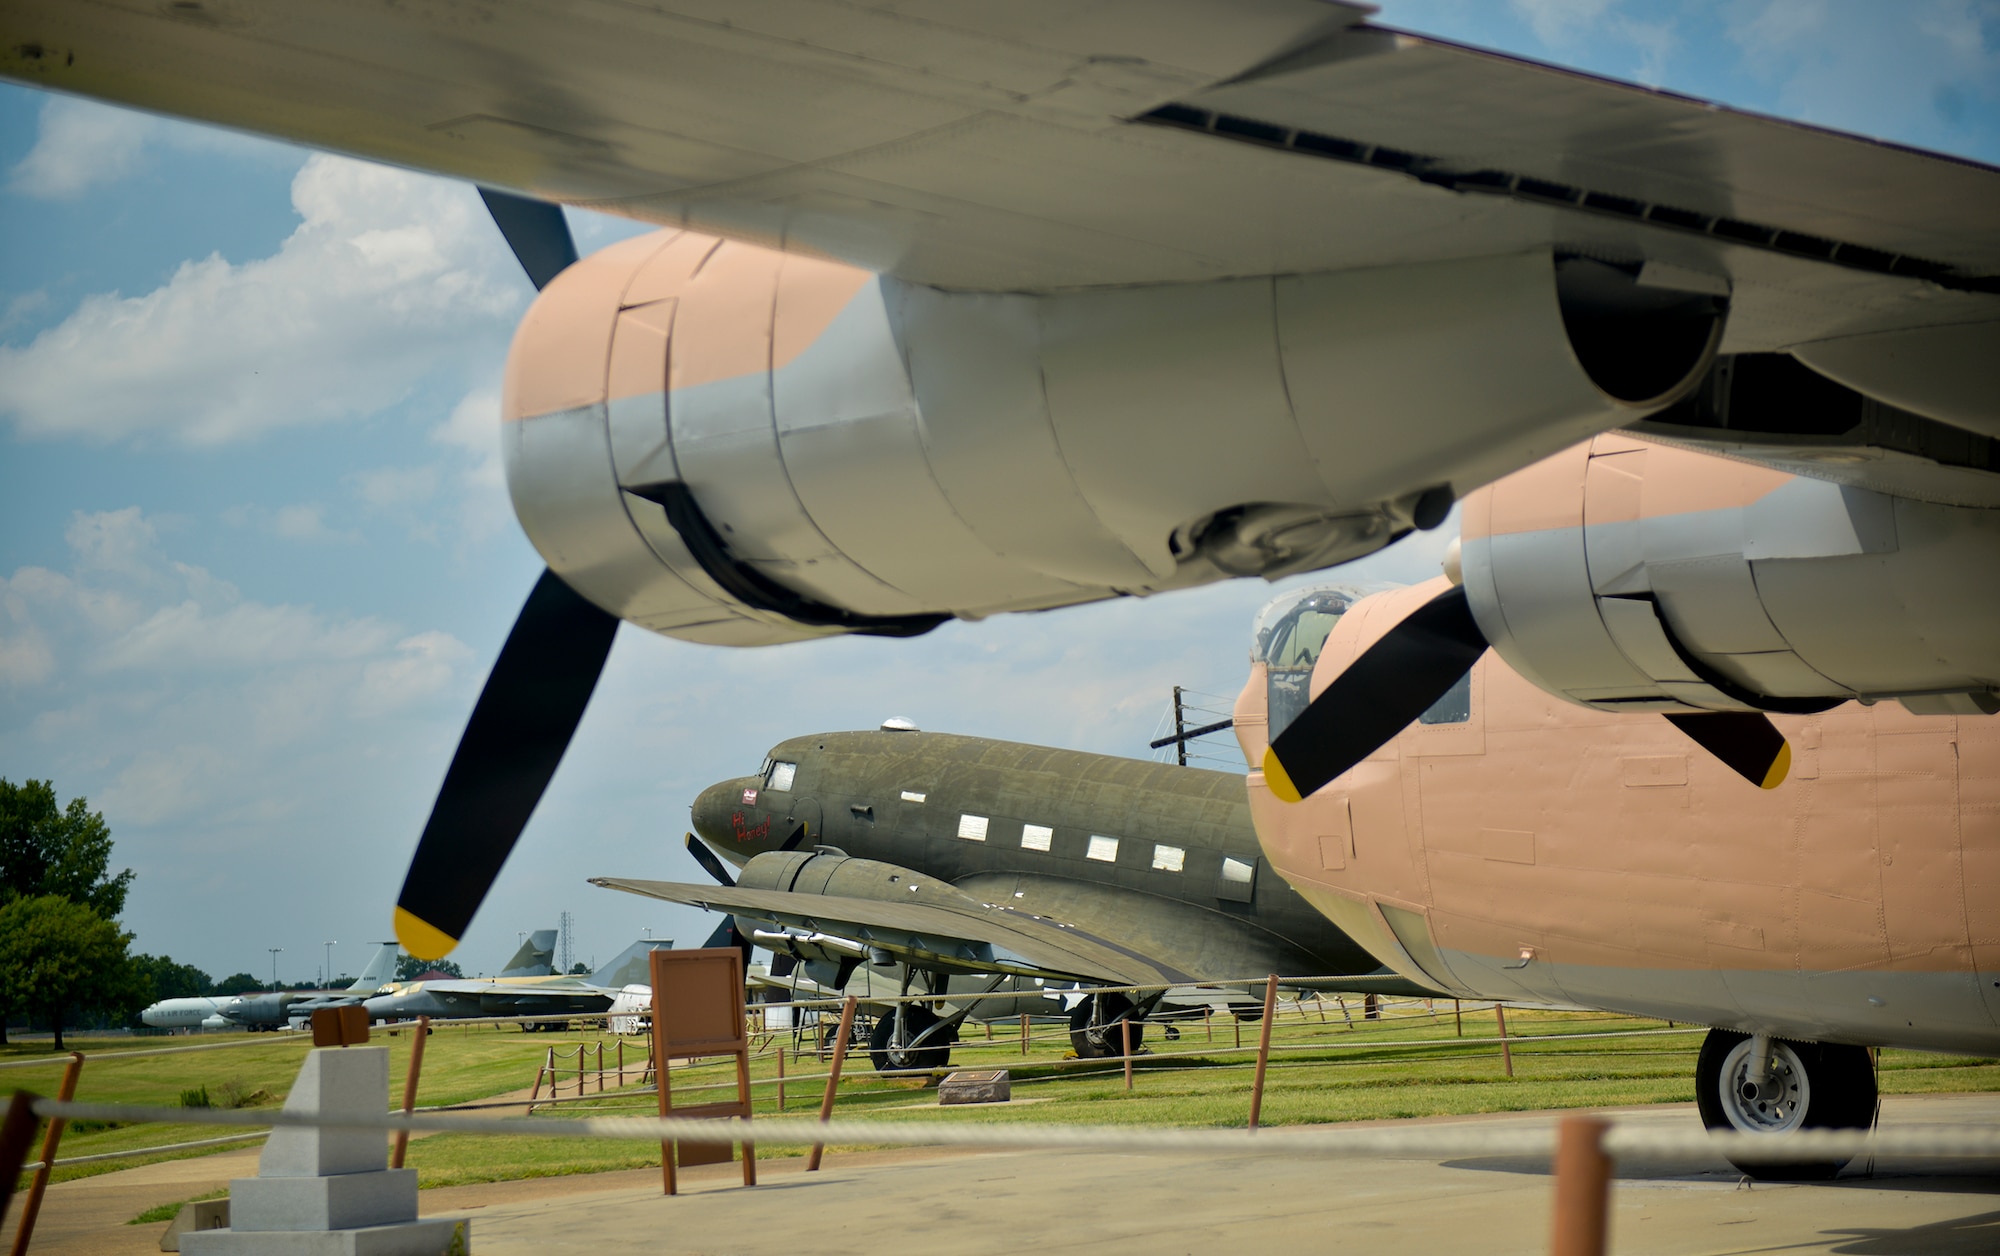 The air park at the Barksdale Global Power Museum features a total of 20 static displays, including 17 aircraft that span from a World War II B-24 Liberator to an SR-71 Blackbird. (U.S. Air Force photo/Senior Airman Mozer O. Da Cunha)